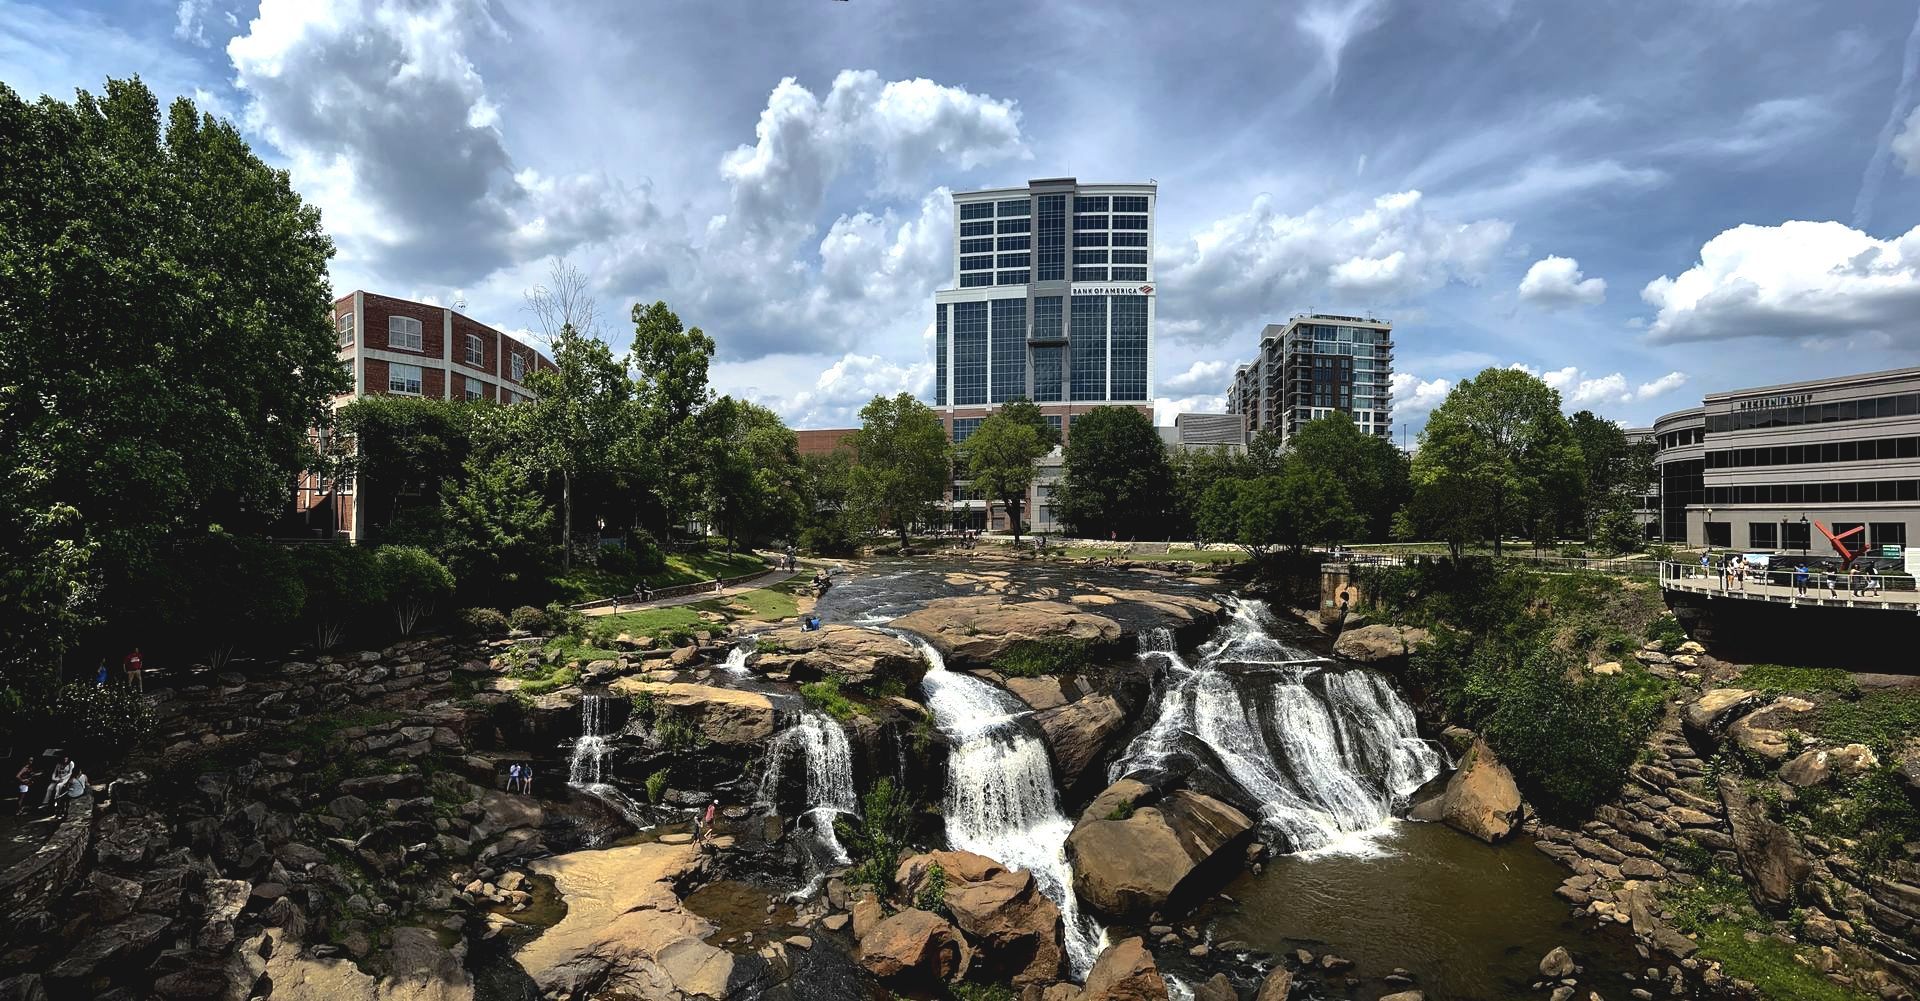 Waterfalls in Greenville, SC with high rises